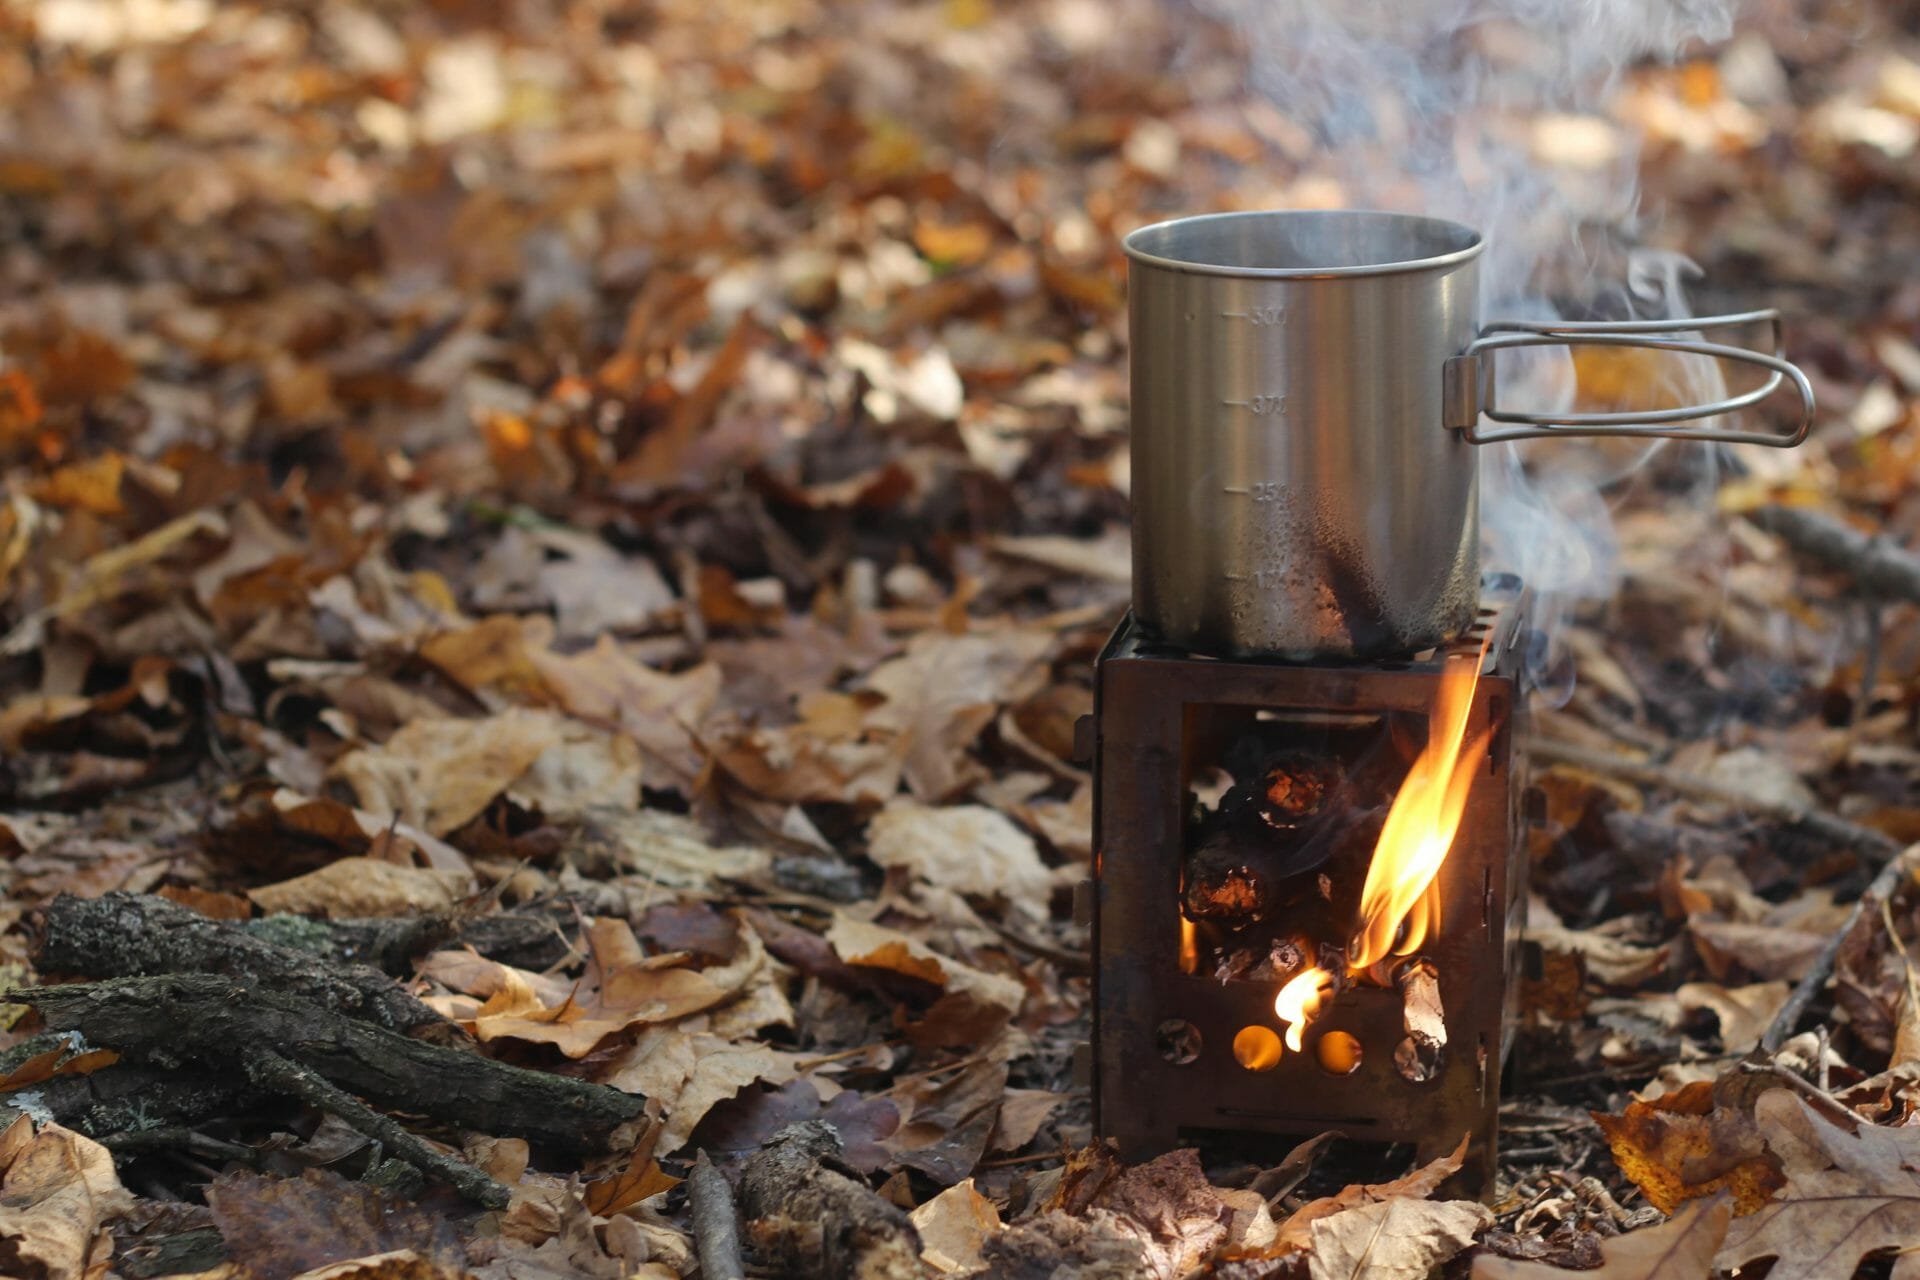 So why choose an outdoor wood stove?